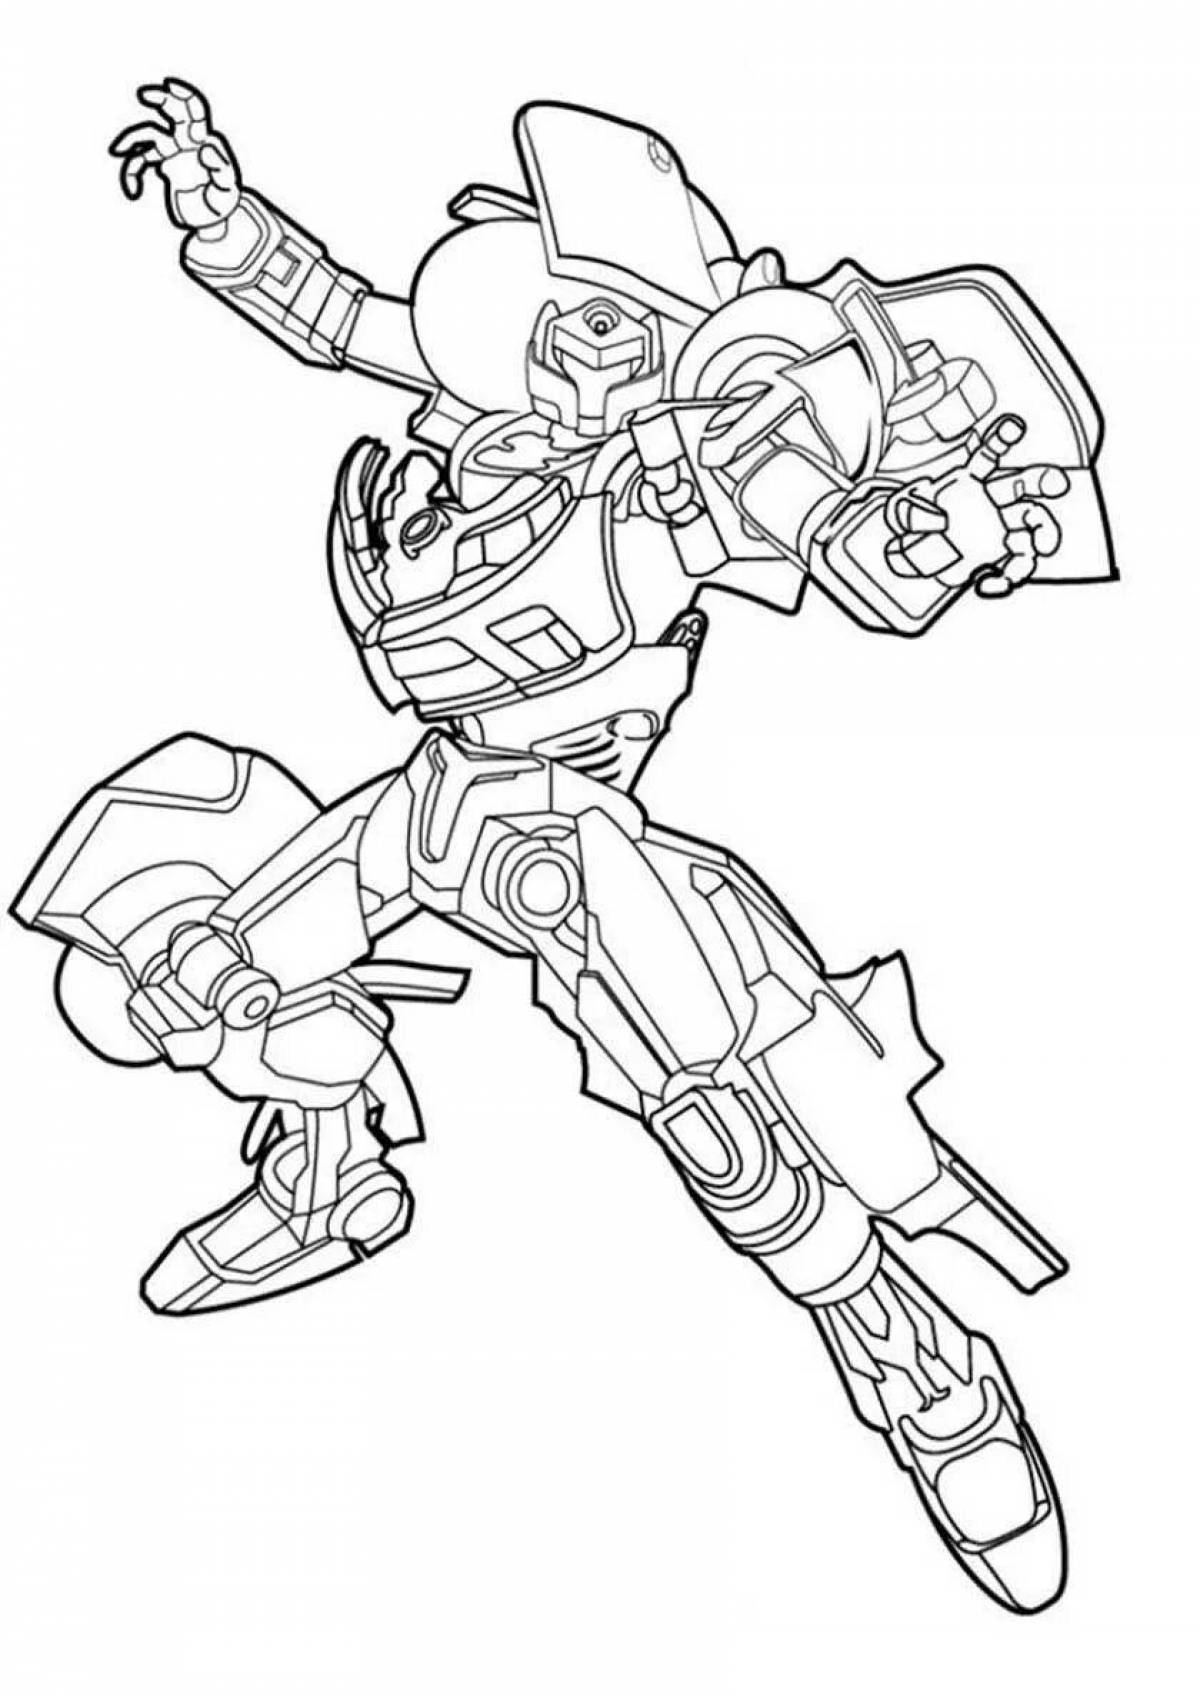 Color-explosive tobot x coloring page